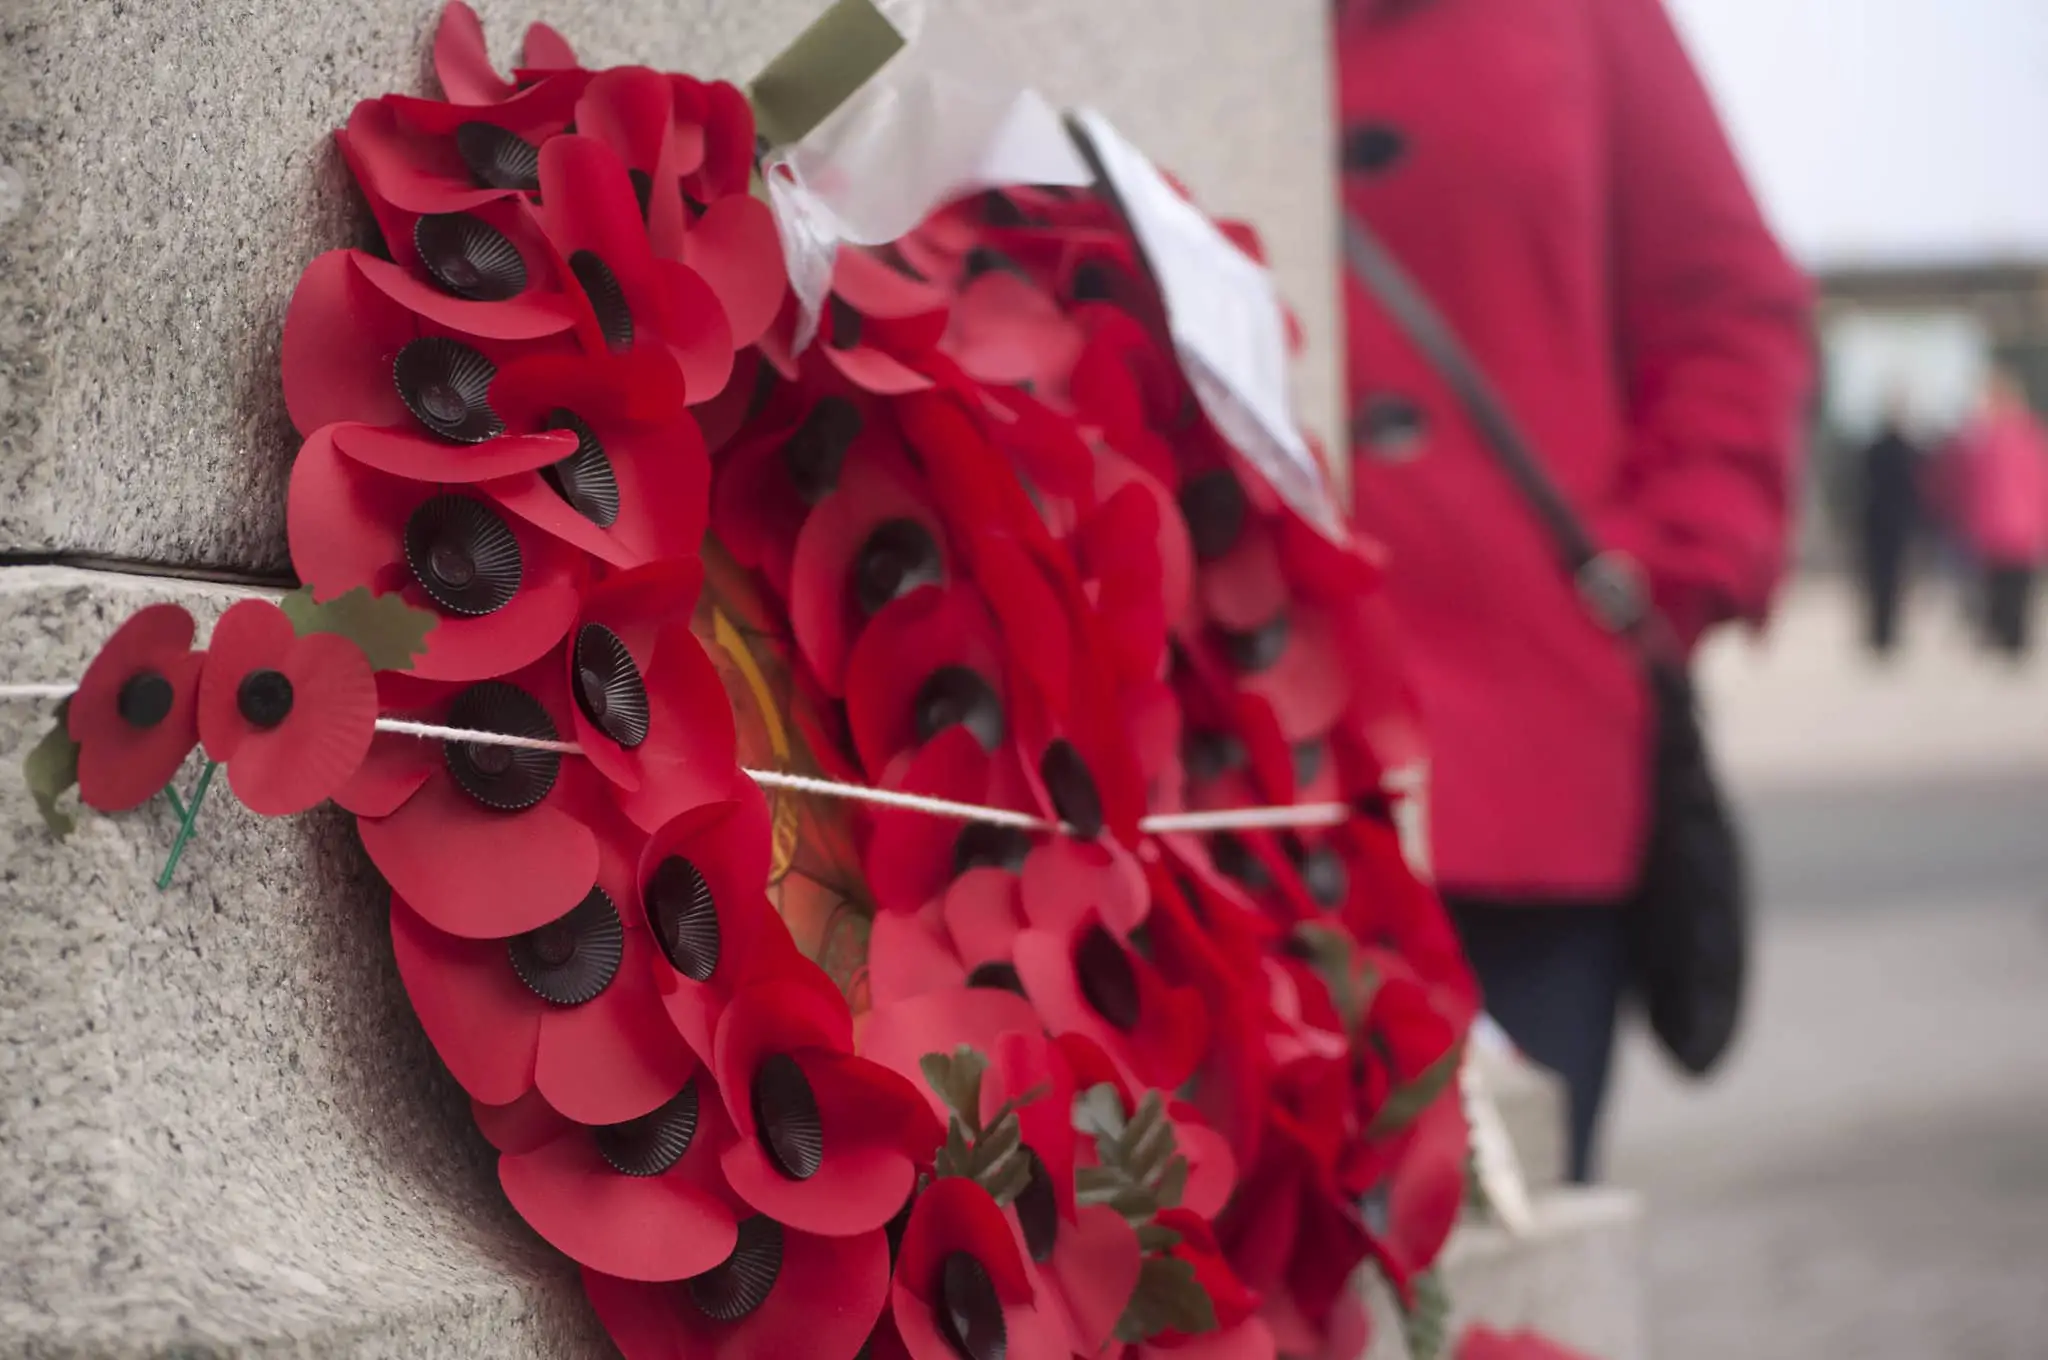 poppy wreaths and woman standing in the background with red coat and black buttons